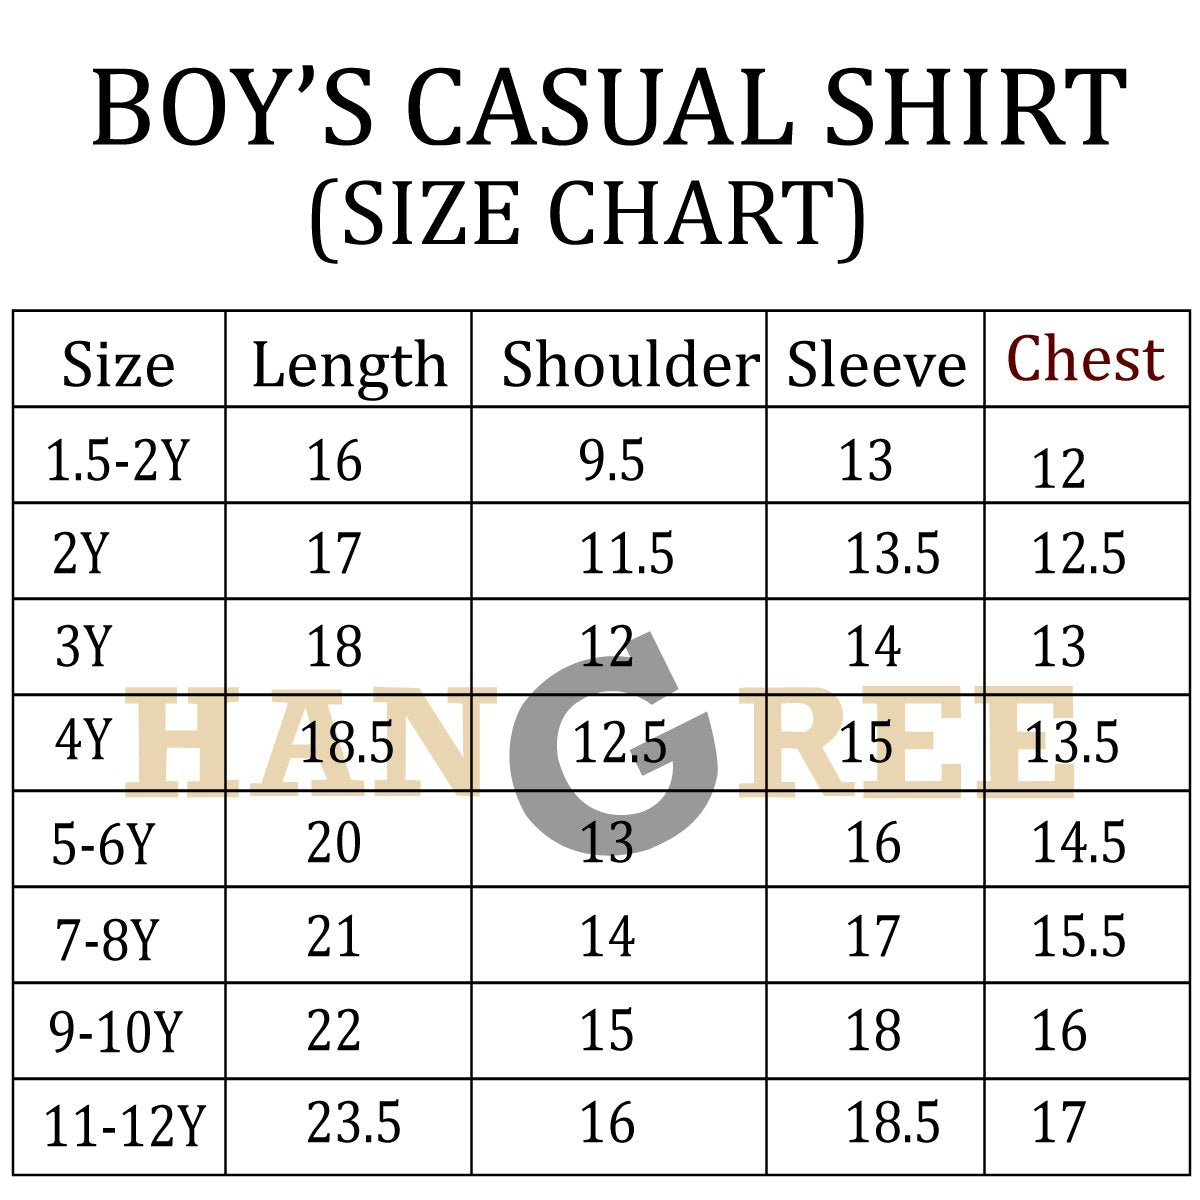 Boy's Sky Blue Solid Casual Shirt